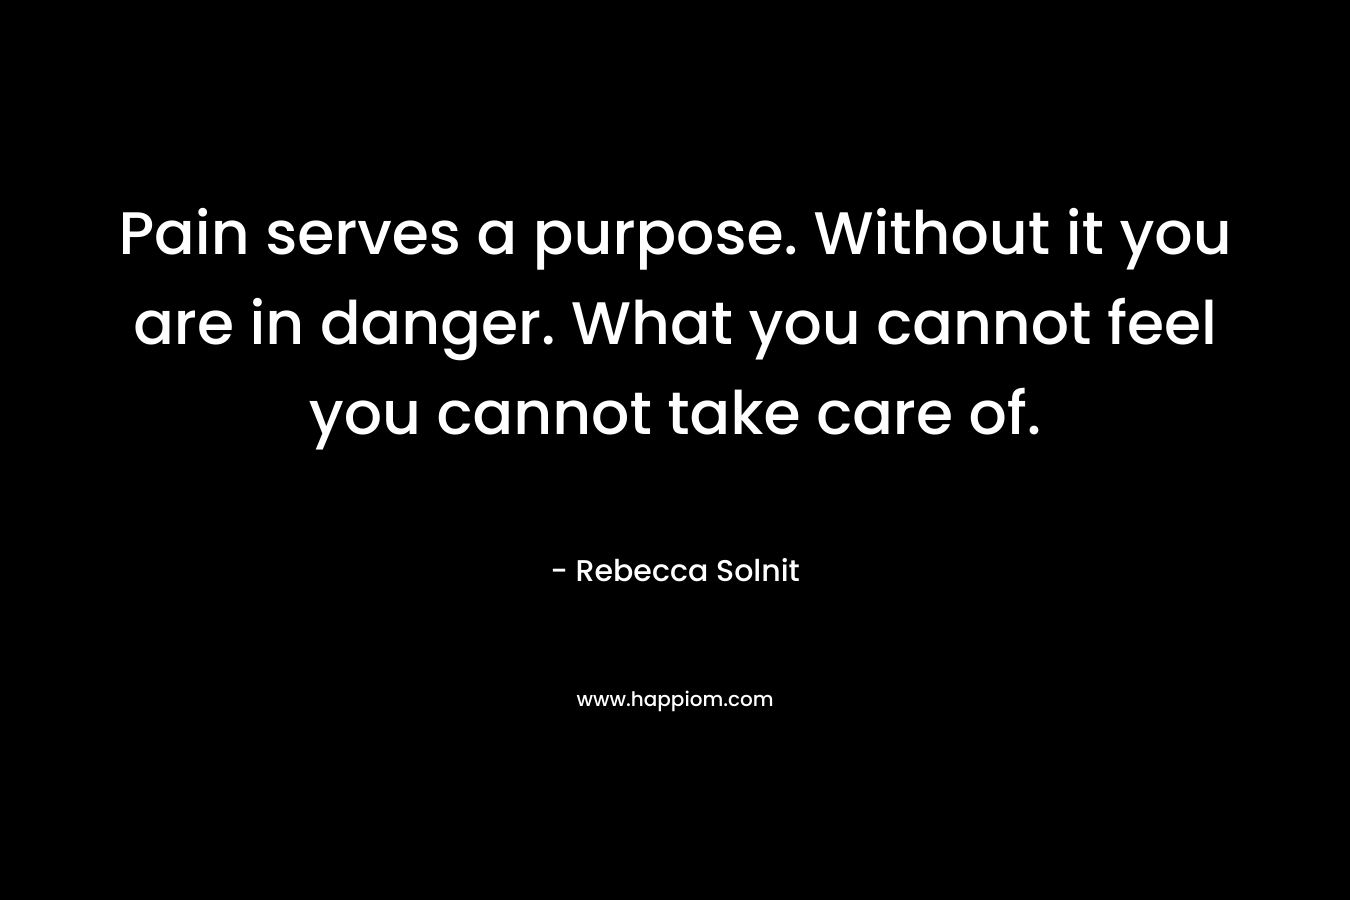 Pain serves a purpose. Without it you are in danger. What you cannot feel you cannot take care of.